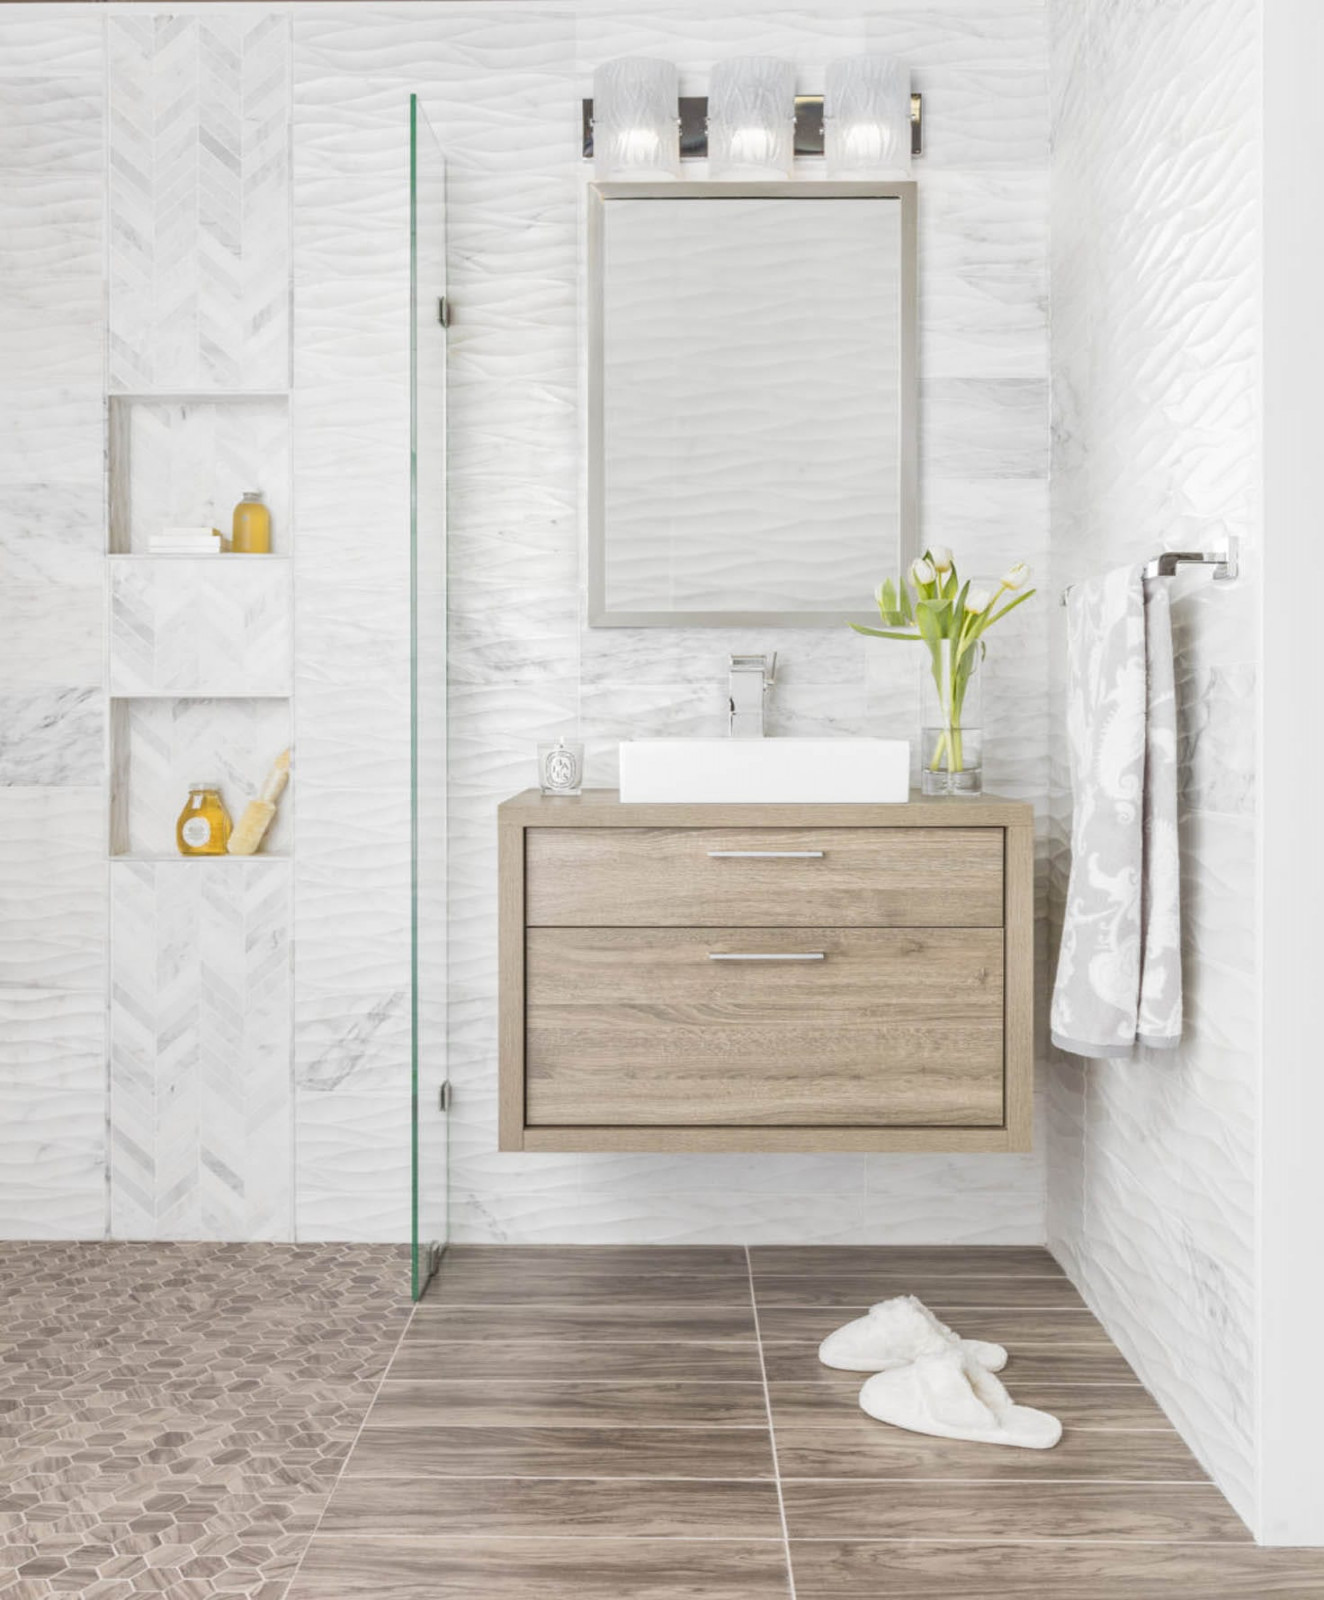 Tried-and-True Wall and Floor Tile Combinations - The Tile Shop Blog